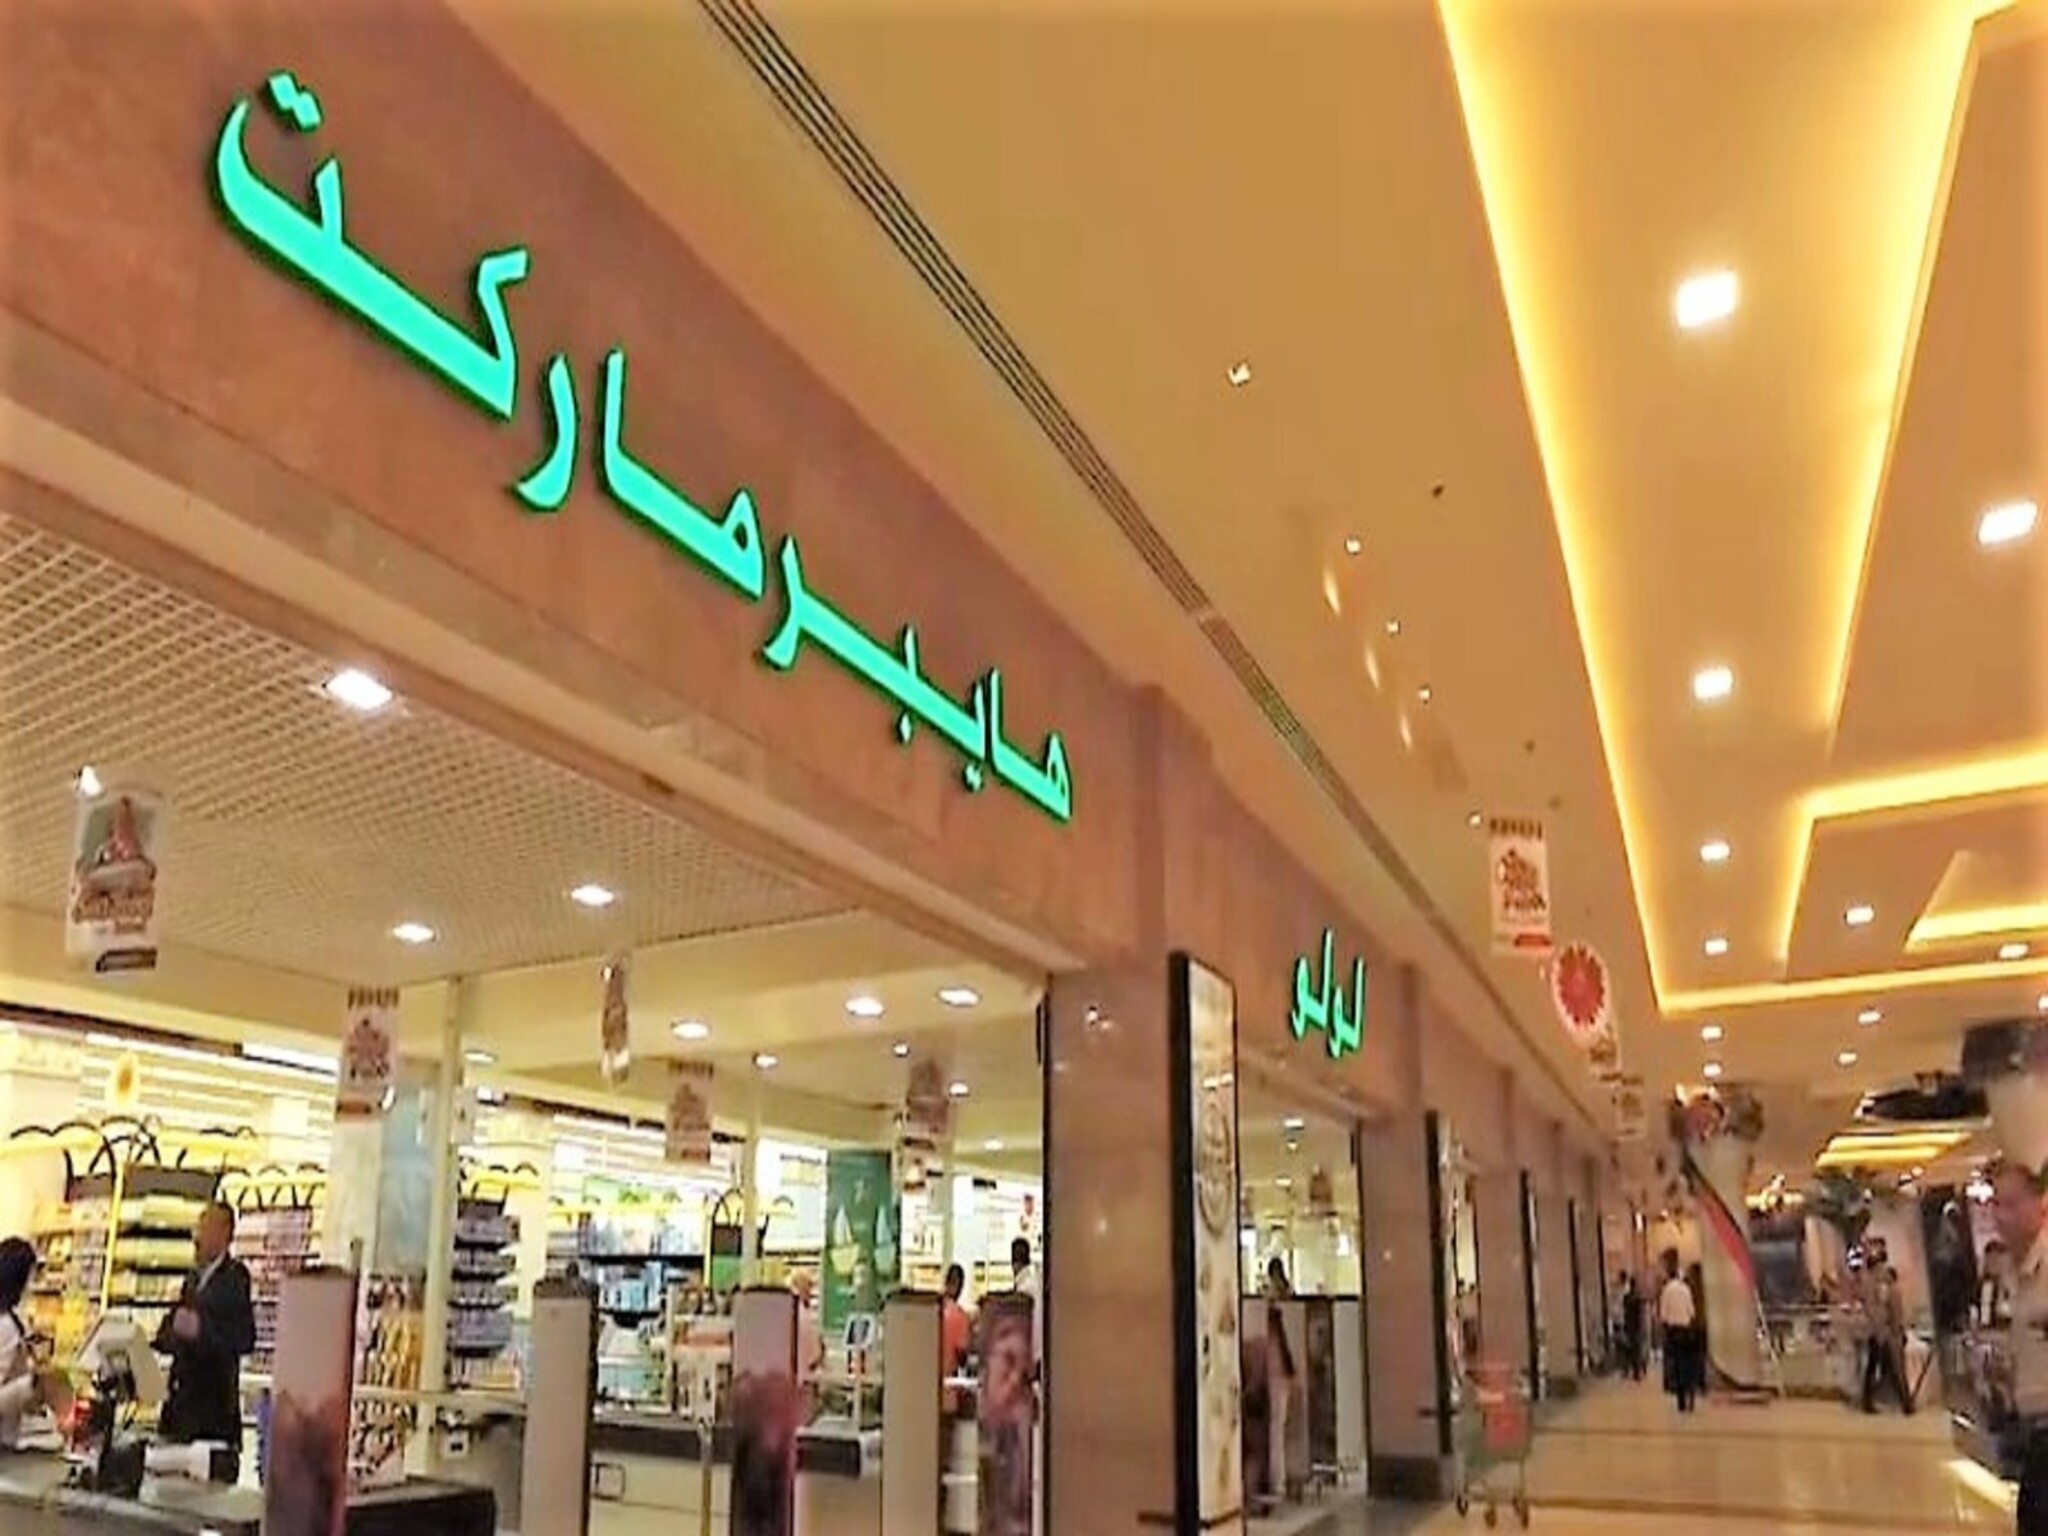 Lulu Hypermarket decided to open new branches in several regions in the UAE